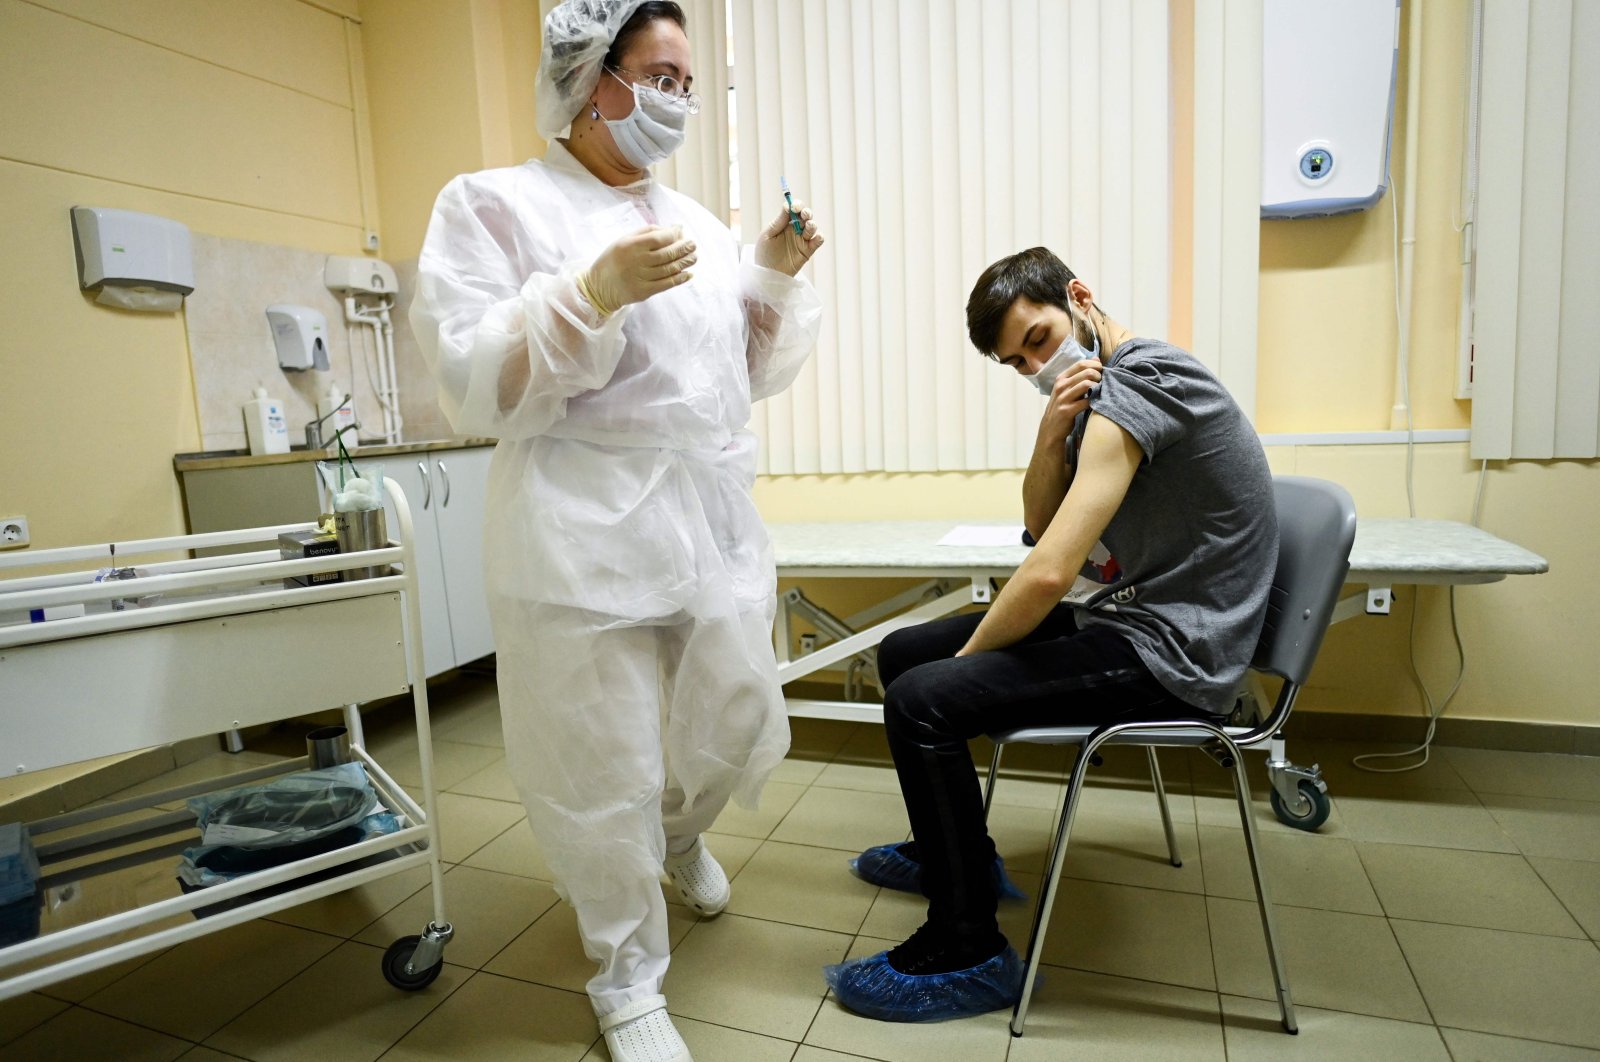 A nurse wearing a face mask proceeds to vaccination against the coronavirus by Sputnik V (Gam-COVID-Vac) vaccine at a clinic in Moscow on Dec. 5, 2020. (AFP Photo)